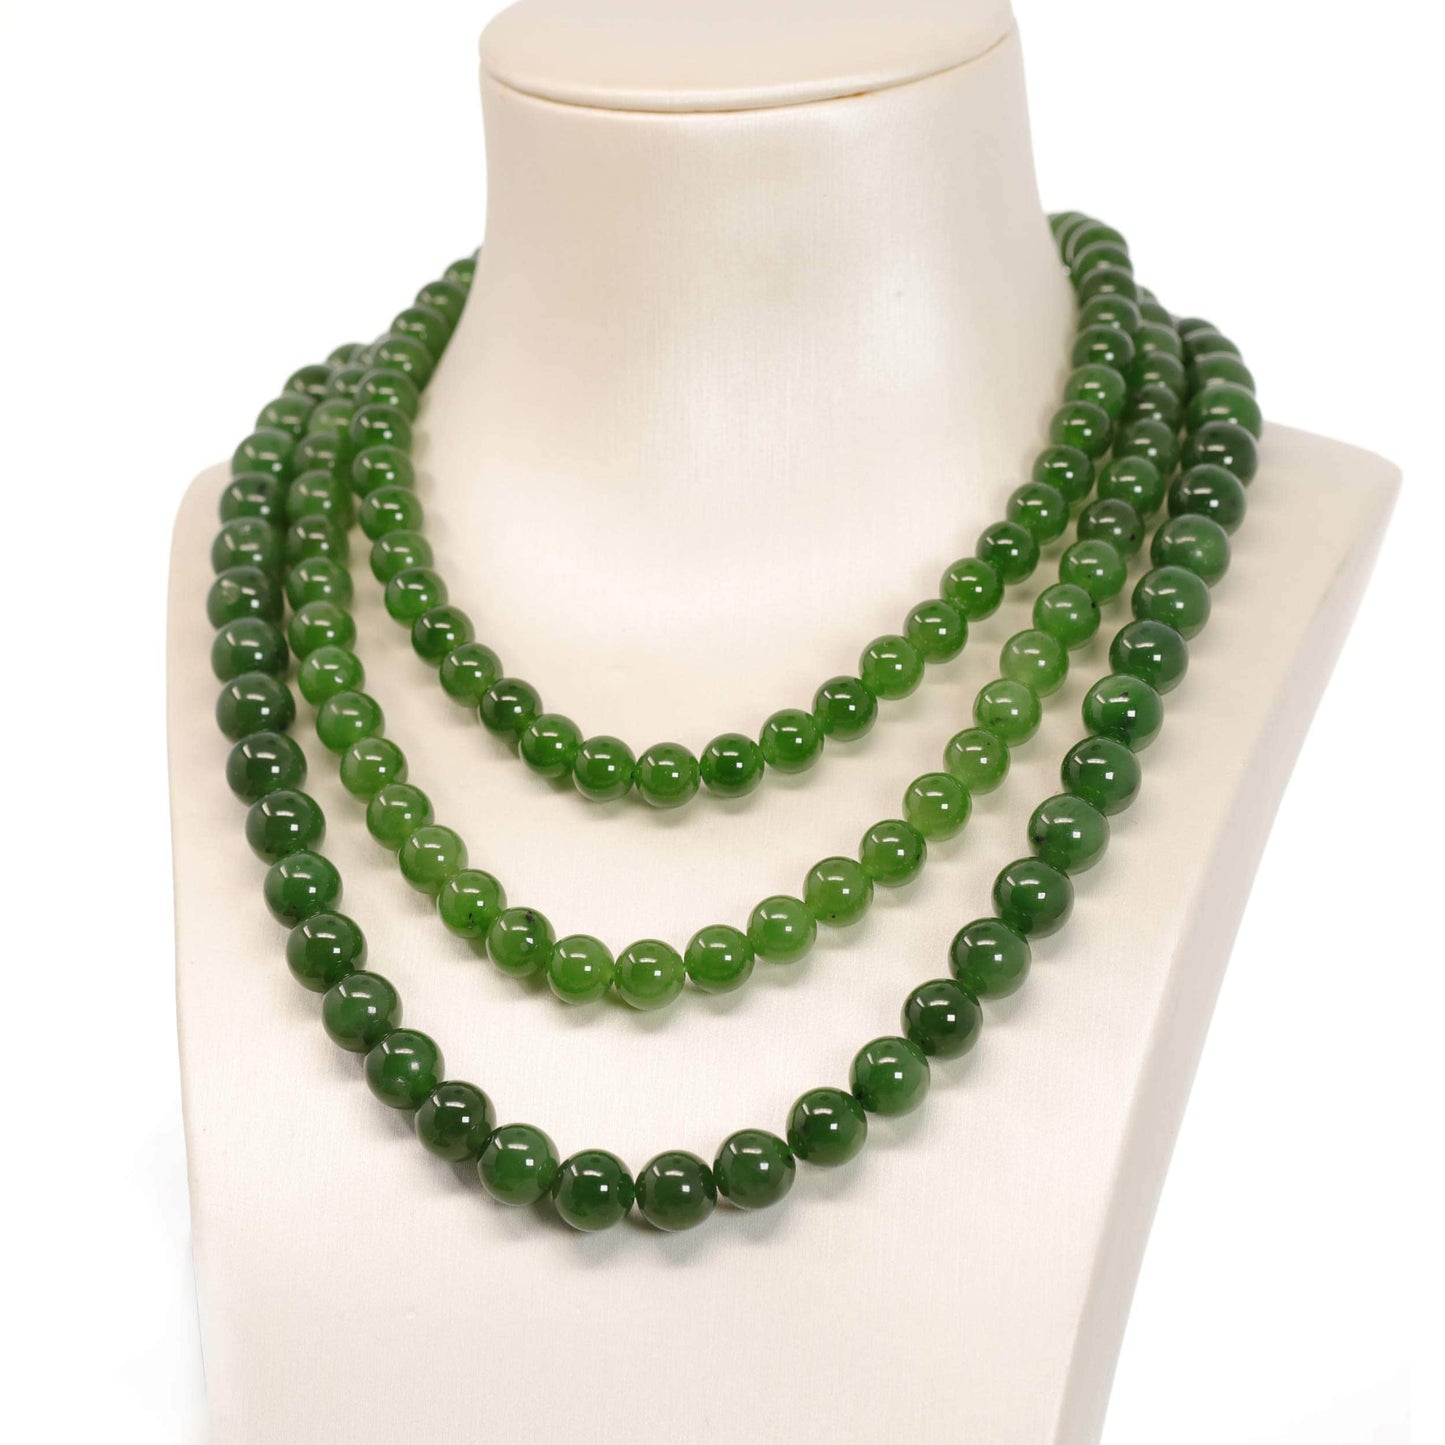 Sold at Auction: LOT OF 3 JADE BEADED NECKLACES